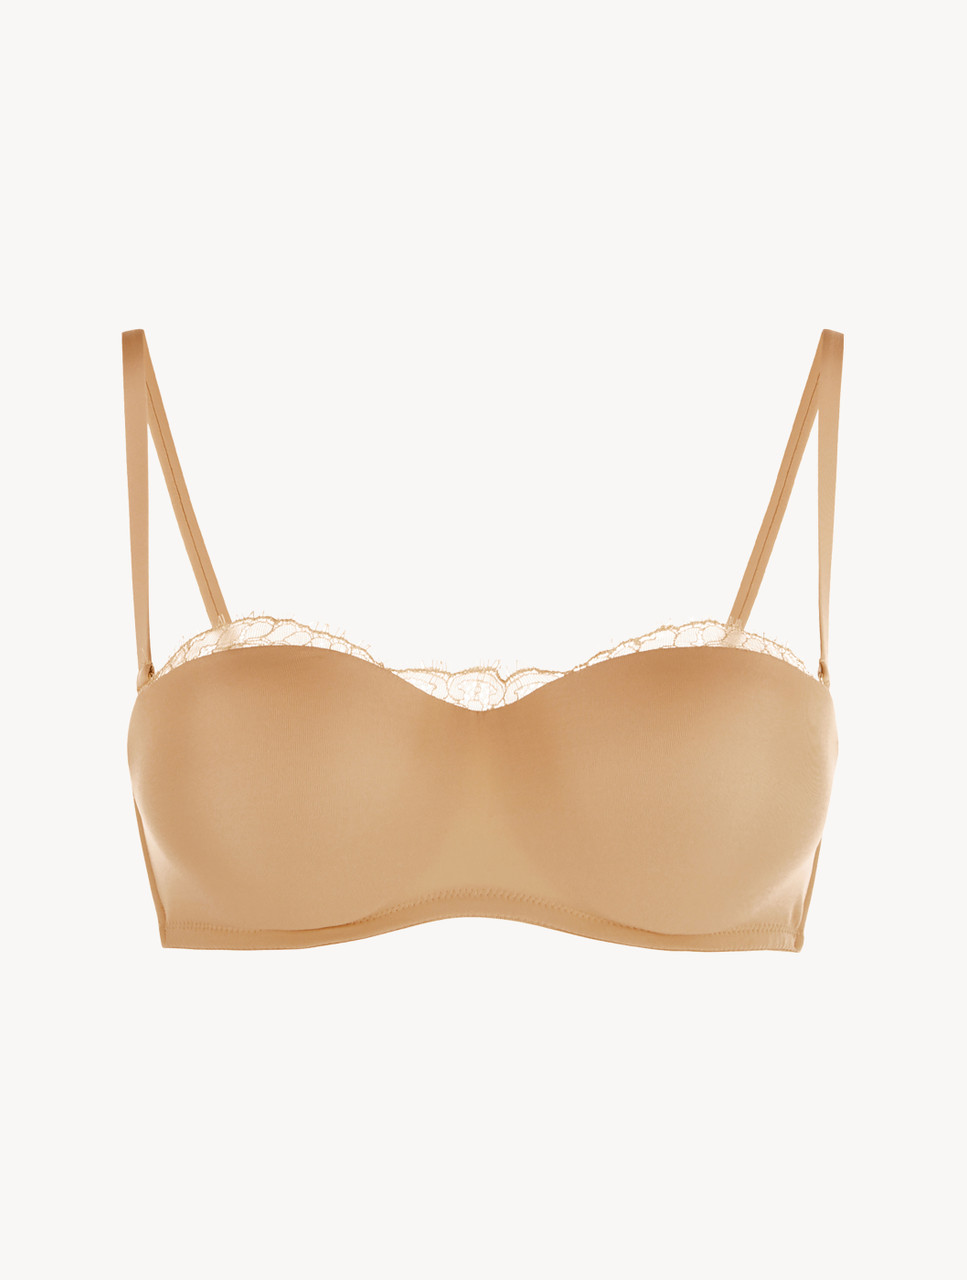 Nude Lycra strapless bandeau bra with Chantilly lace